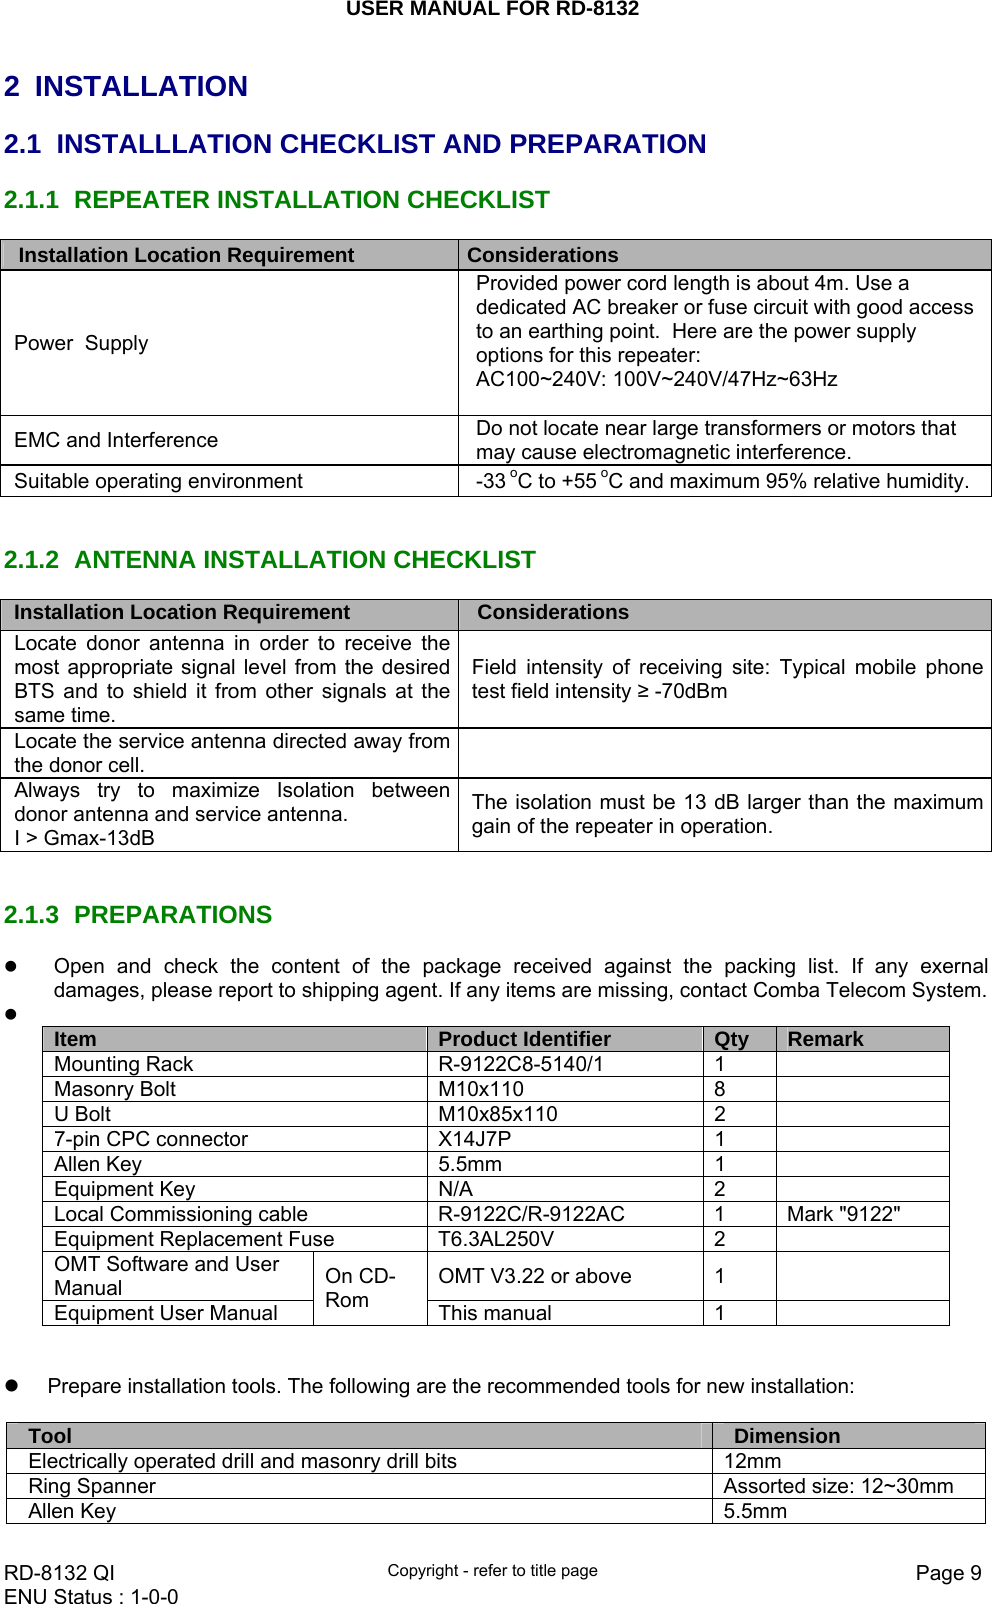 USER MANUAL FOR RD-8132    RD-8132 QI  Copyright - refer to title page  Page 9ENU Status : 1-0-0    2 INSTALLATION 2.1  INSTALLLATION CHECKLIST AND PREPARATION 2.1.1  REPEATER INSTALLATION CHECKLIST Installation Location Requirement     Considerations   Power  Supply Provided power cord length is about 4m. Use a dedicated AC breaker or fuse circuit with good access to an earthing point.  Here are the power supply options for this repeater:  AC100~240V: 100V~240V/47Hz~63Hz  EMC and Interference  Do not locate near large transformers or motors that may cause electromagnetic interference. Suitable operating environment    -33 oC to +55 oC and maximum 95% relative humidity.   2.1.2  ANTENNA INSTALLATION CHECKLIST Installation Location Requirement     Considerations   Locate donor antenna in order to receive the most appropriate signal level from the desired BTS and to shield it from other signals at the same time.   Field intensity of receiving site: Typical mobile phone test field intensity ≥ -70dBm   Locate the service antenna directed away from the donor cell.     Always try to maximize Isolation between donor antenna and service antenna.  I &gt; Gmax-13dB  The isolation must be 13 dB larger than the maximum gain of the repeater in operation.   2.1.3 PREPARATIONS z Open and check the content of the package received against the packing list. If any exernal damages, please report to shipping agent. If any items are missing, contact Comba Telecom System. z  Item  Product Identifier  Qty  Remark Mounting Rack  R-9122C8-5140/1  1   Masonry Bolt  M10x110  8   U Bolt  M10x85x110  2   7-pin CPC connector  X14J7P  1   Allen Key  5.5mm  1   Equipment Key  N/A  2   Local Commissioning cable    R-9122C/R-9122AC  1  Mark &quot;9122&quot; Equipment Replacement Fuse  T6.3AL250V  2   OMT Software and User Manual  OMT V3.22 or above   1   Equipment User Manual On CD-Rom  This manual  1     z  Prepare installation tools. The following are the recommended tools for new installation:  Tool  Dimension Electrically operated drill and masonry drill bits  12mm Ring Spanner  Assorted size: 12~30mm Allen Key   5.5mm 